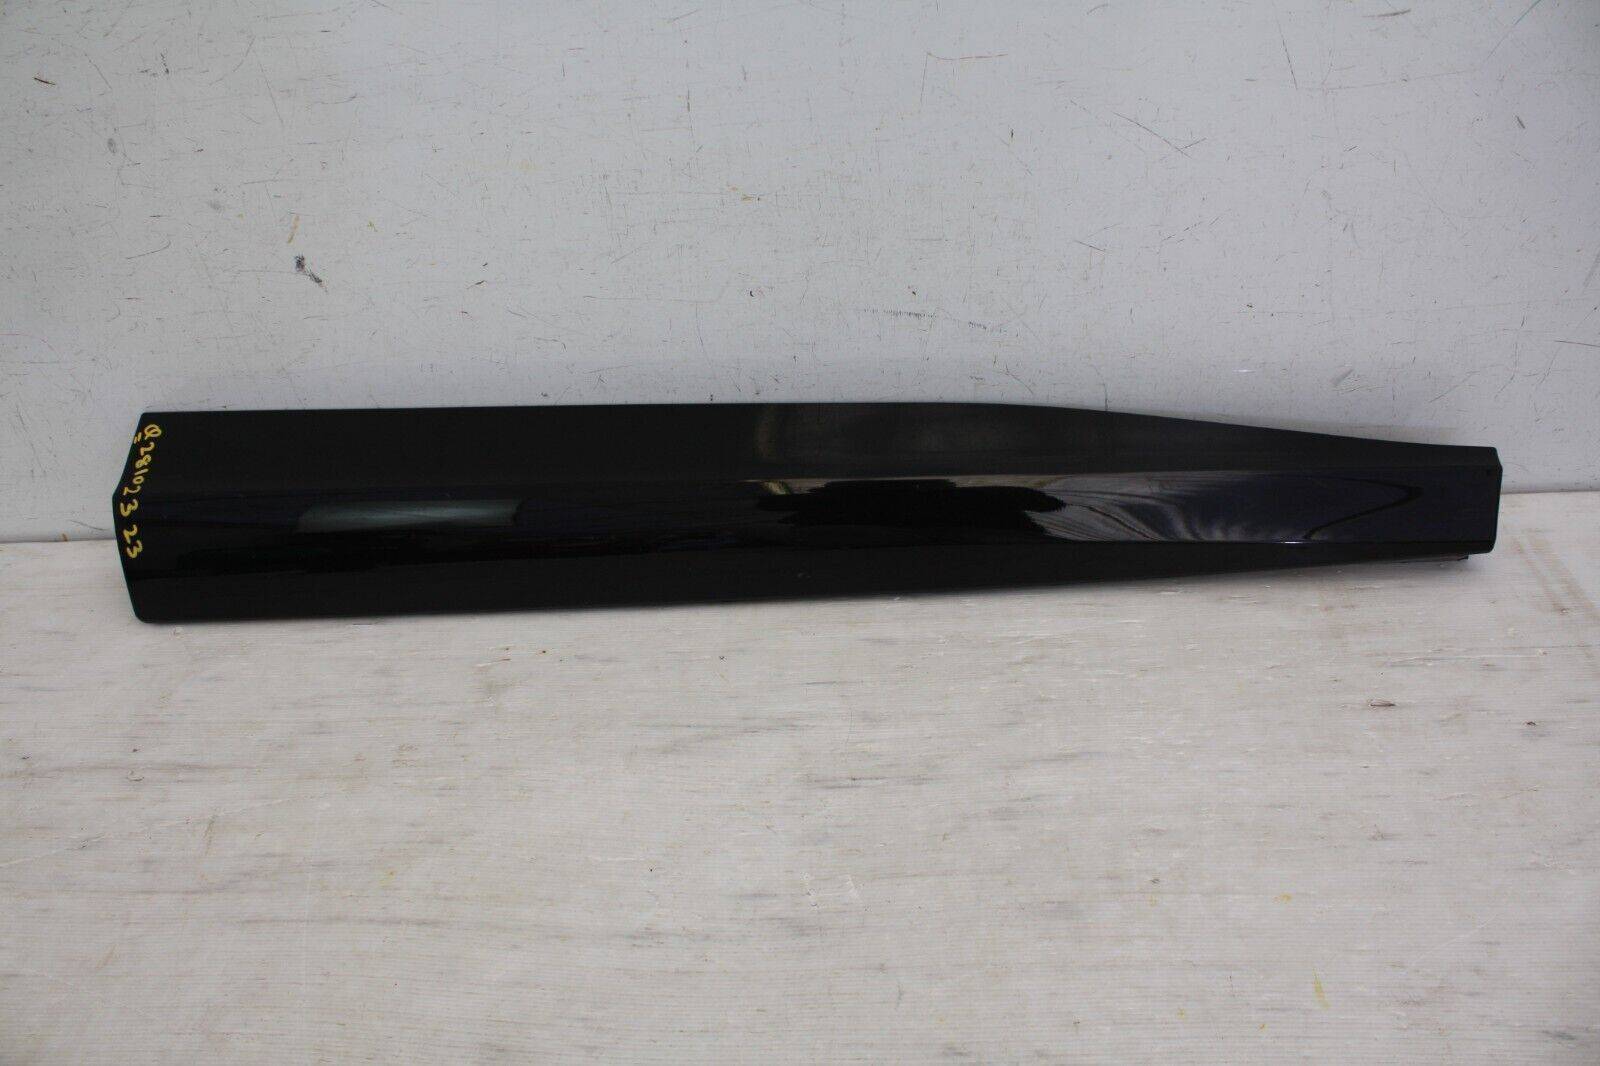 Ford Mustang Mach E Front Right Door Moulding 2020 to 2023 LJ8B R20848 B Genuine 175996259492